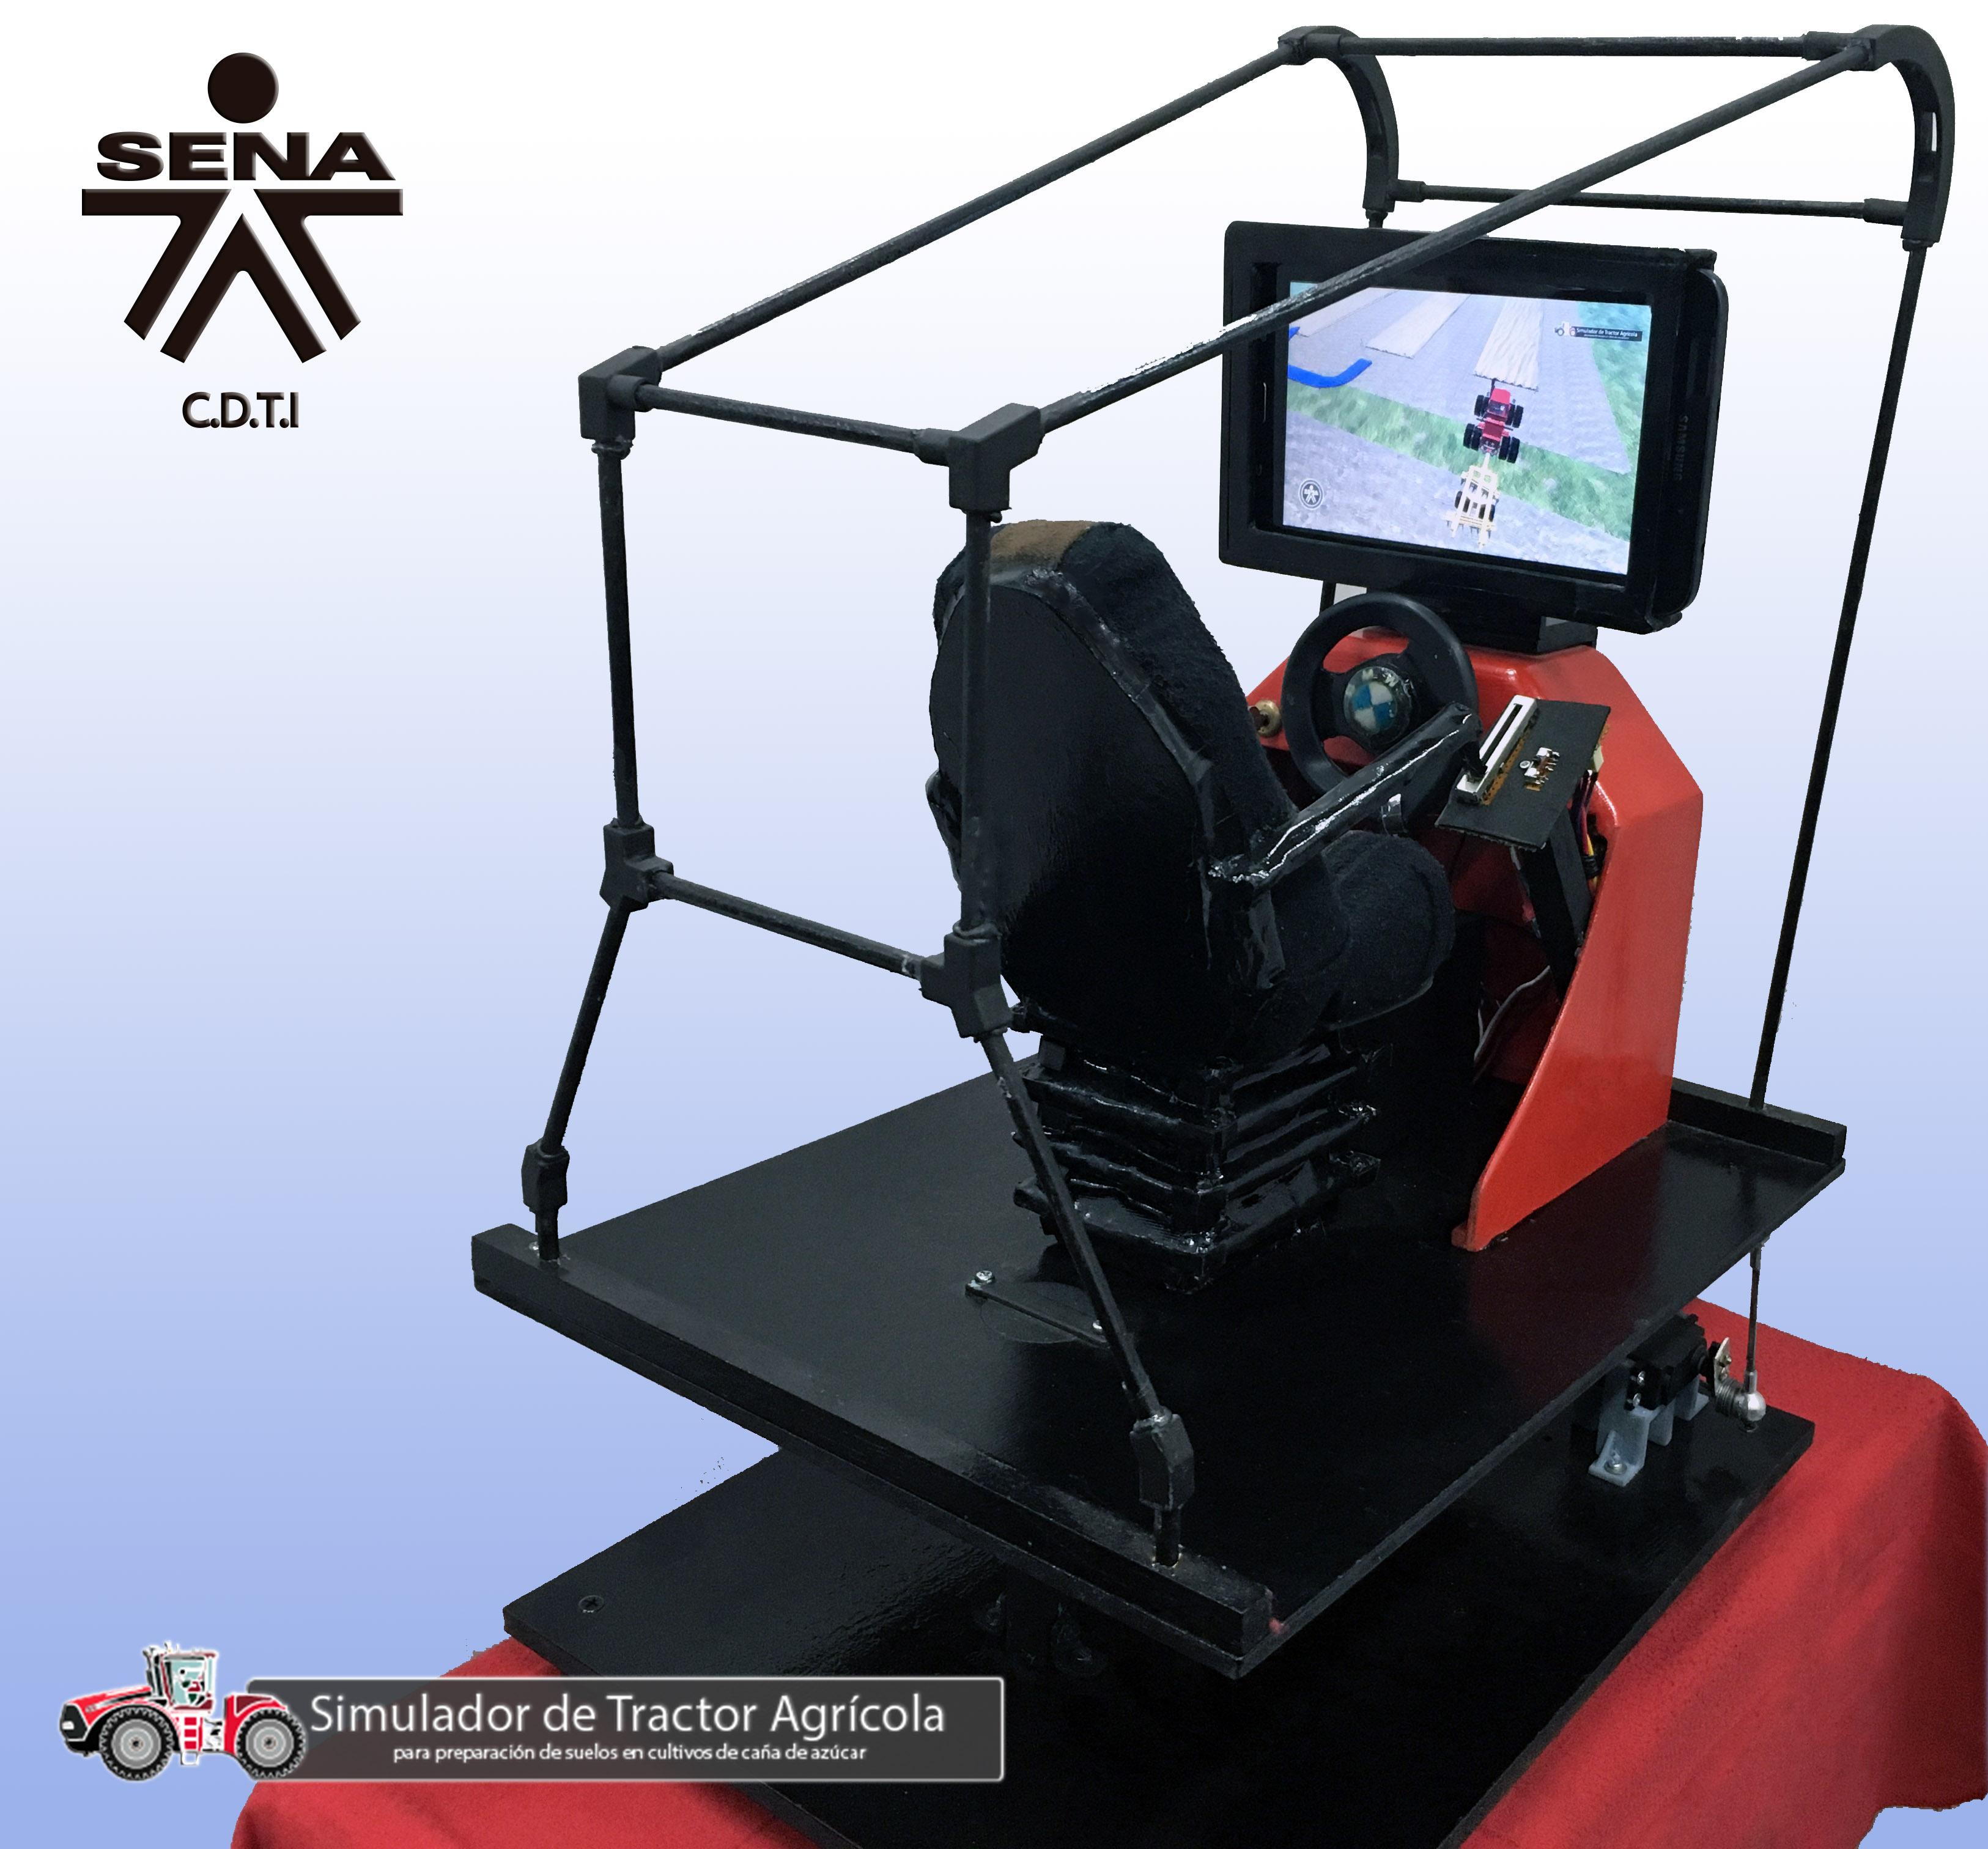 Design and Development of a Tractor Simulator as Interactive Learning Platform